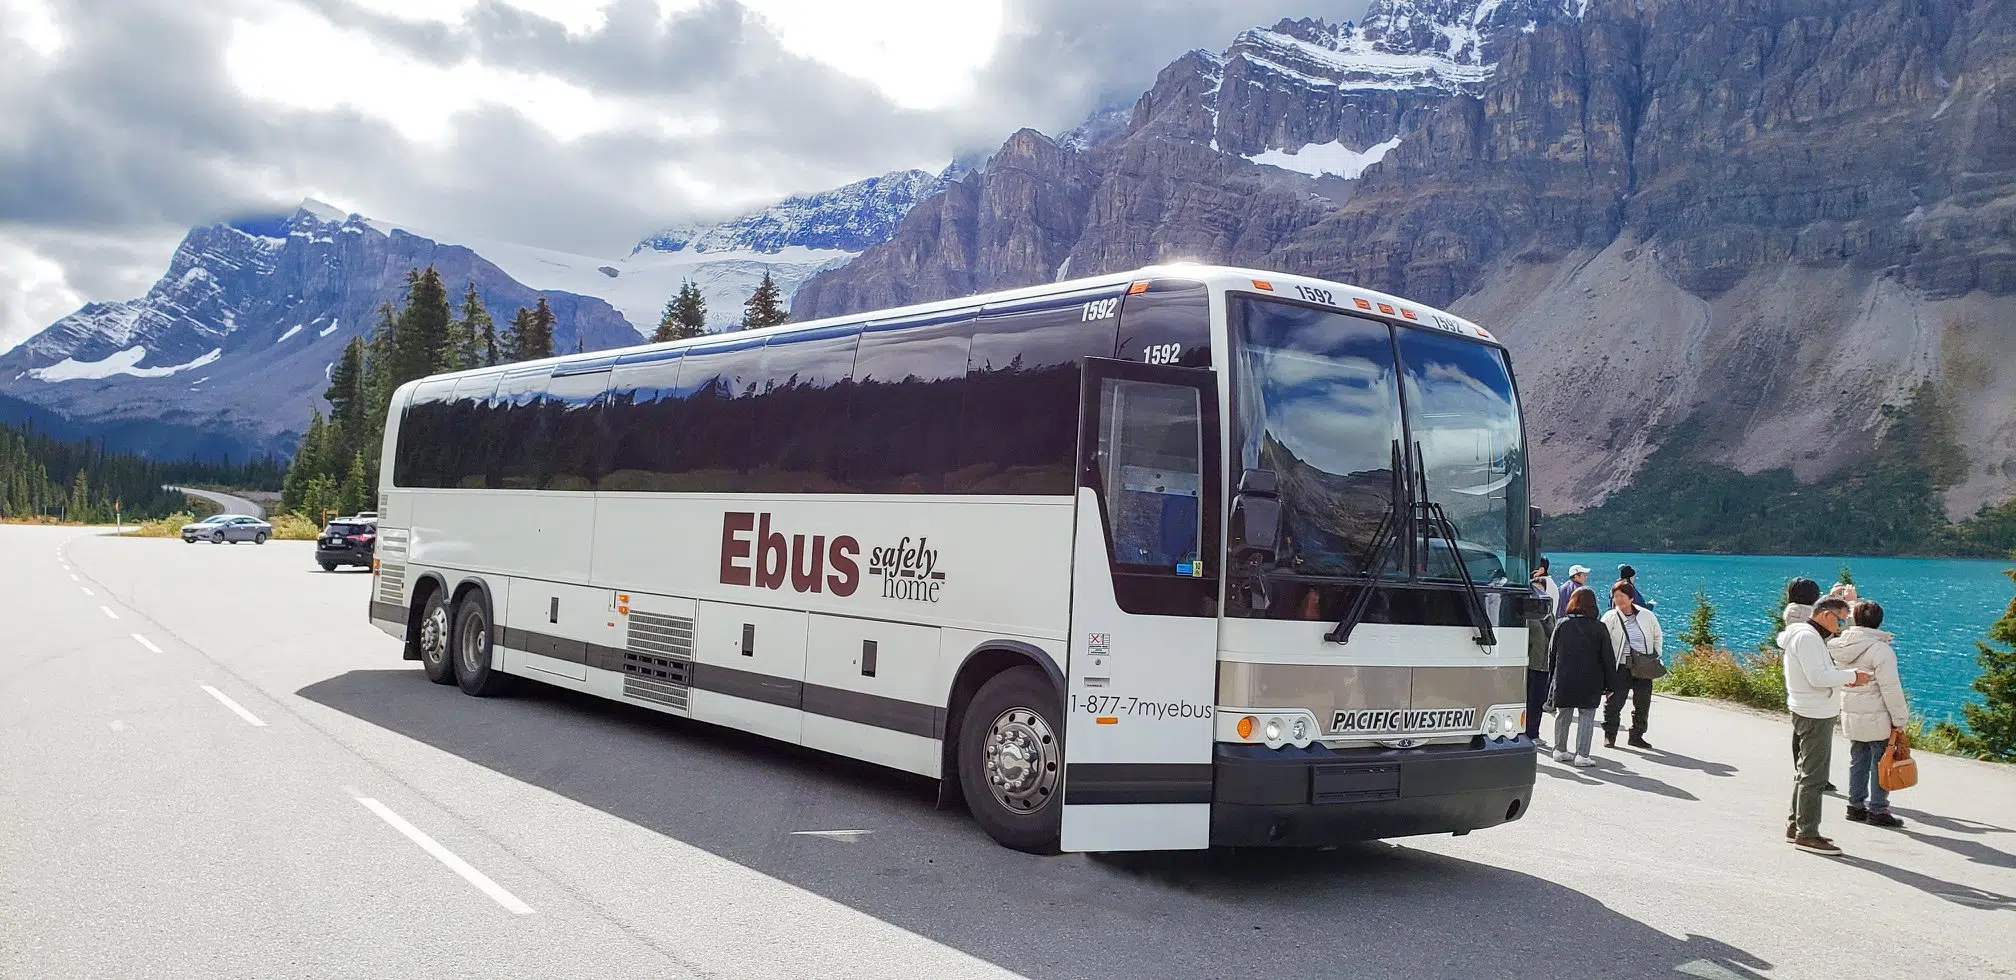 Ebus modifying route times, some stops in B.C.